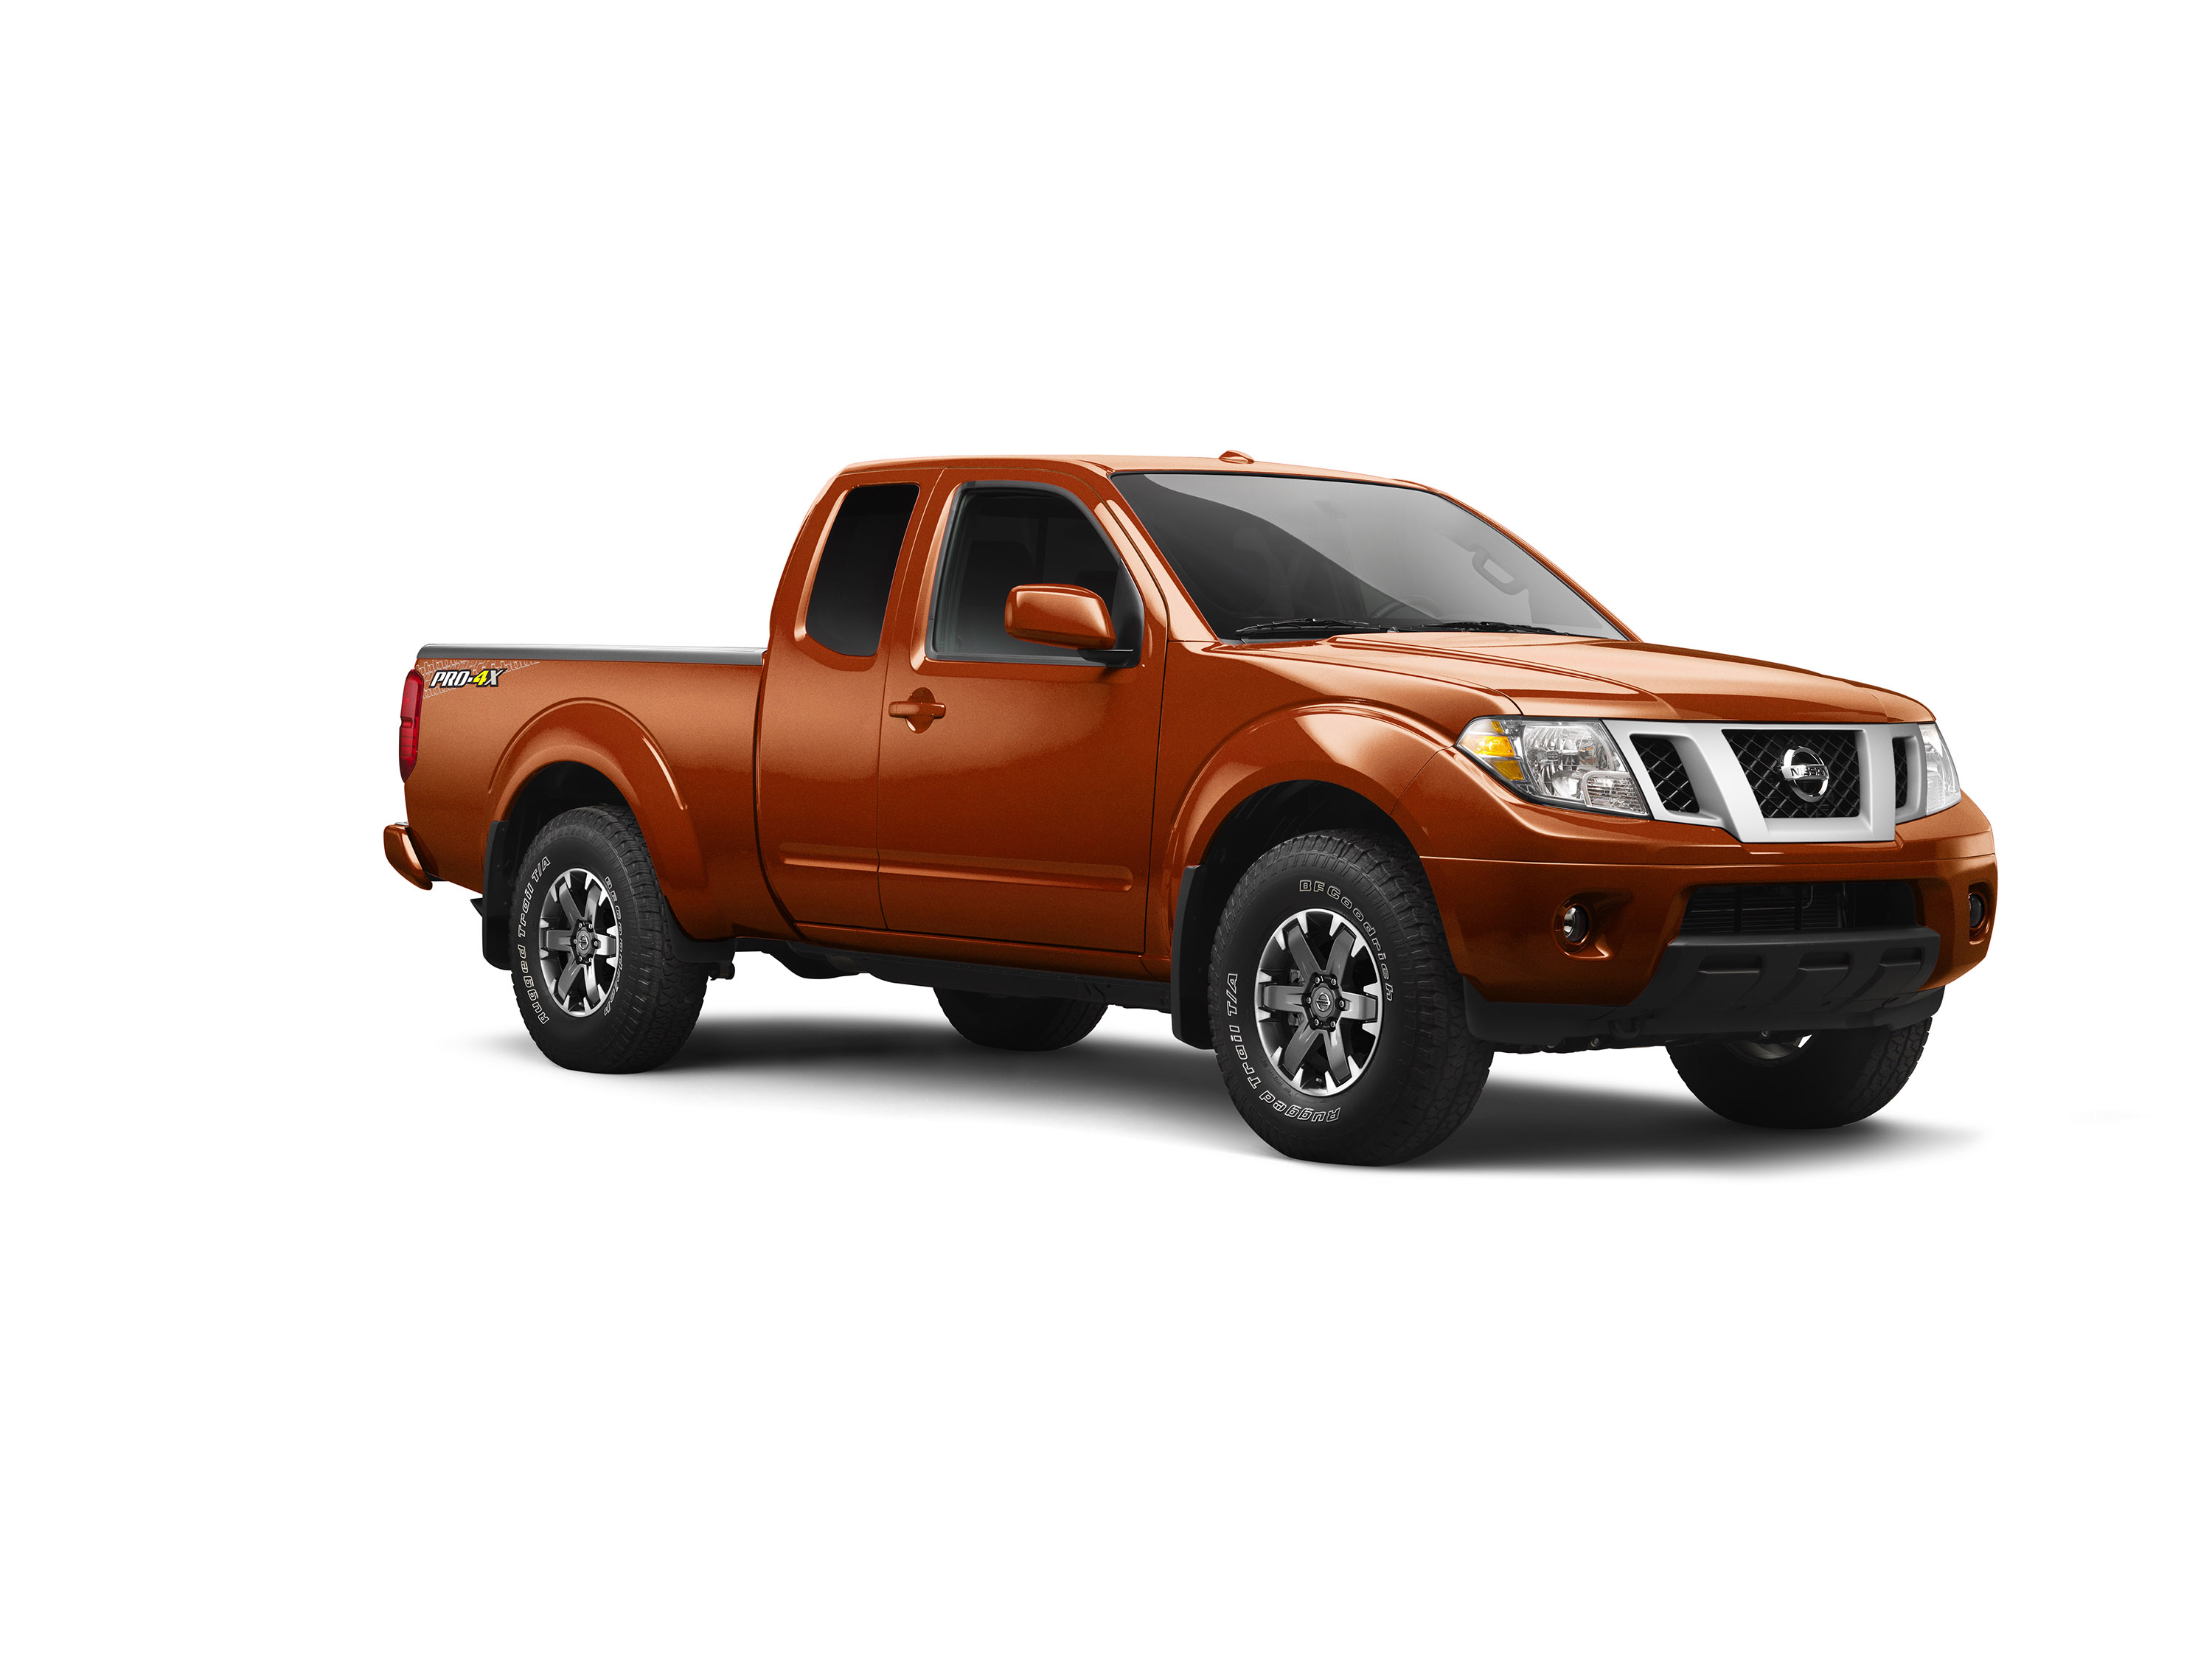 2002 Nissan Frontier Towing Capacity Chart